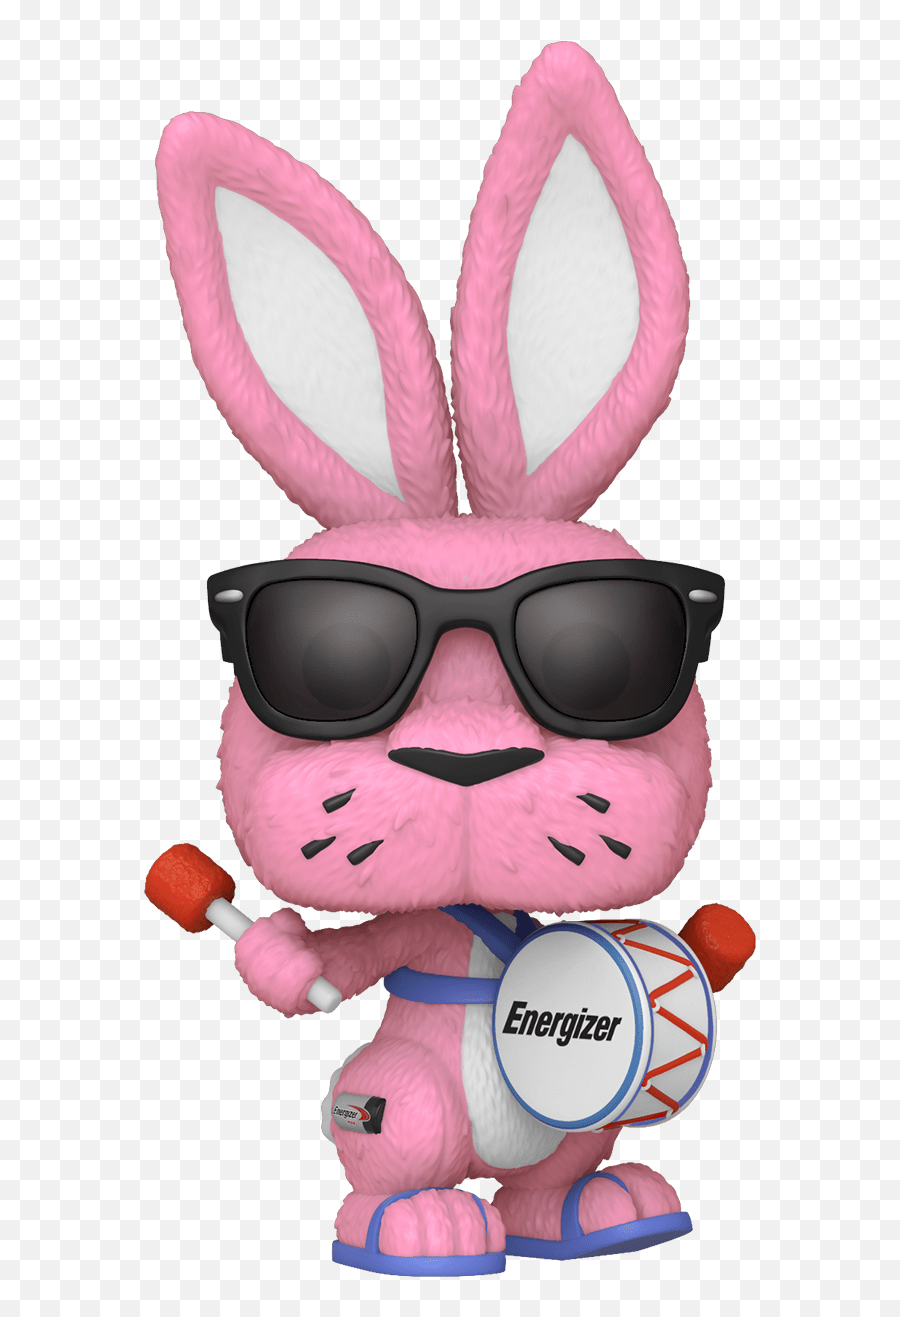 Energizer Bunny Ad Icon Pop Coming Soon To Maltacomics - Energizer Bunny Funko Pop Png,Dr Strange Icon